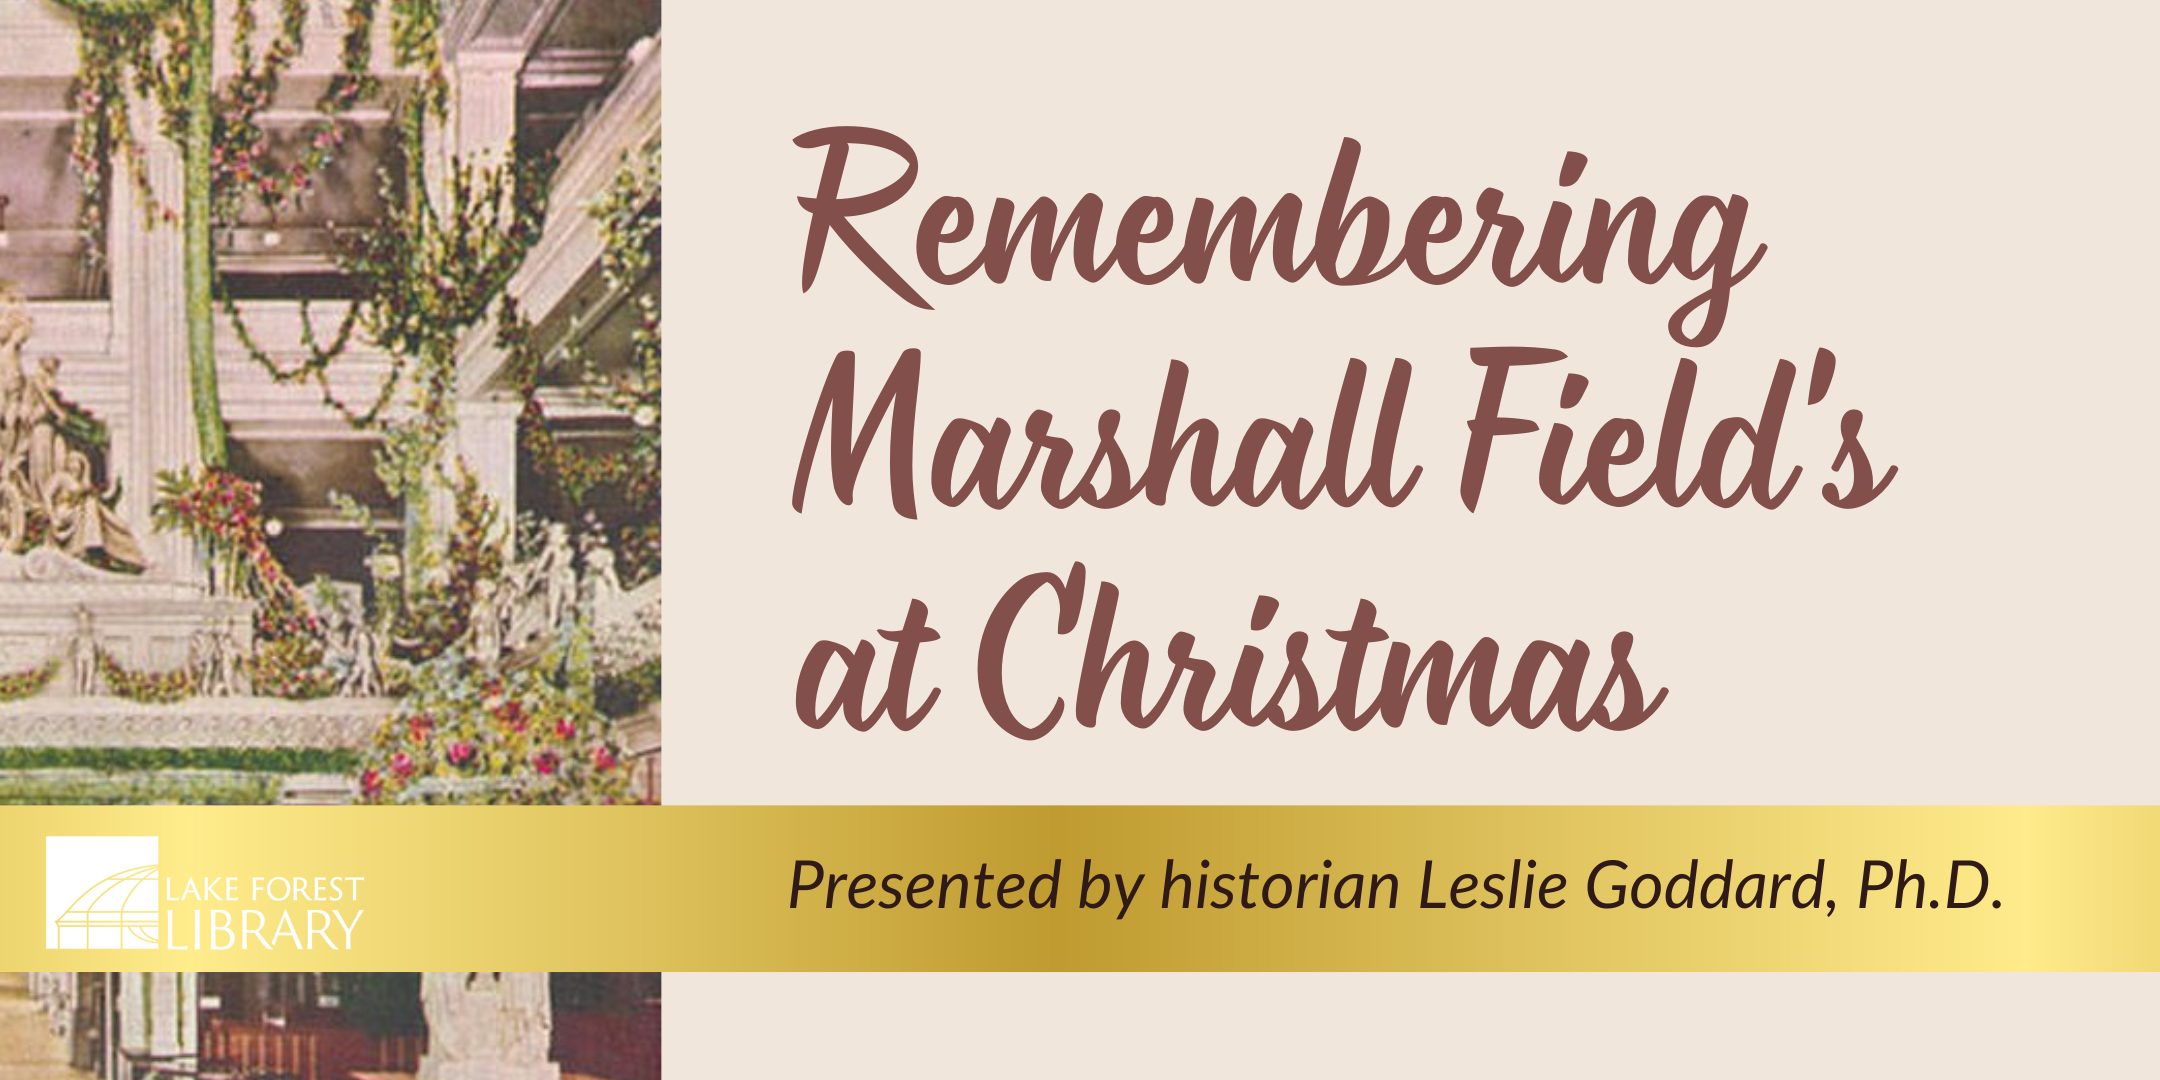 image of "Remembering Marshall Field's at Christmas"